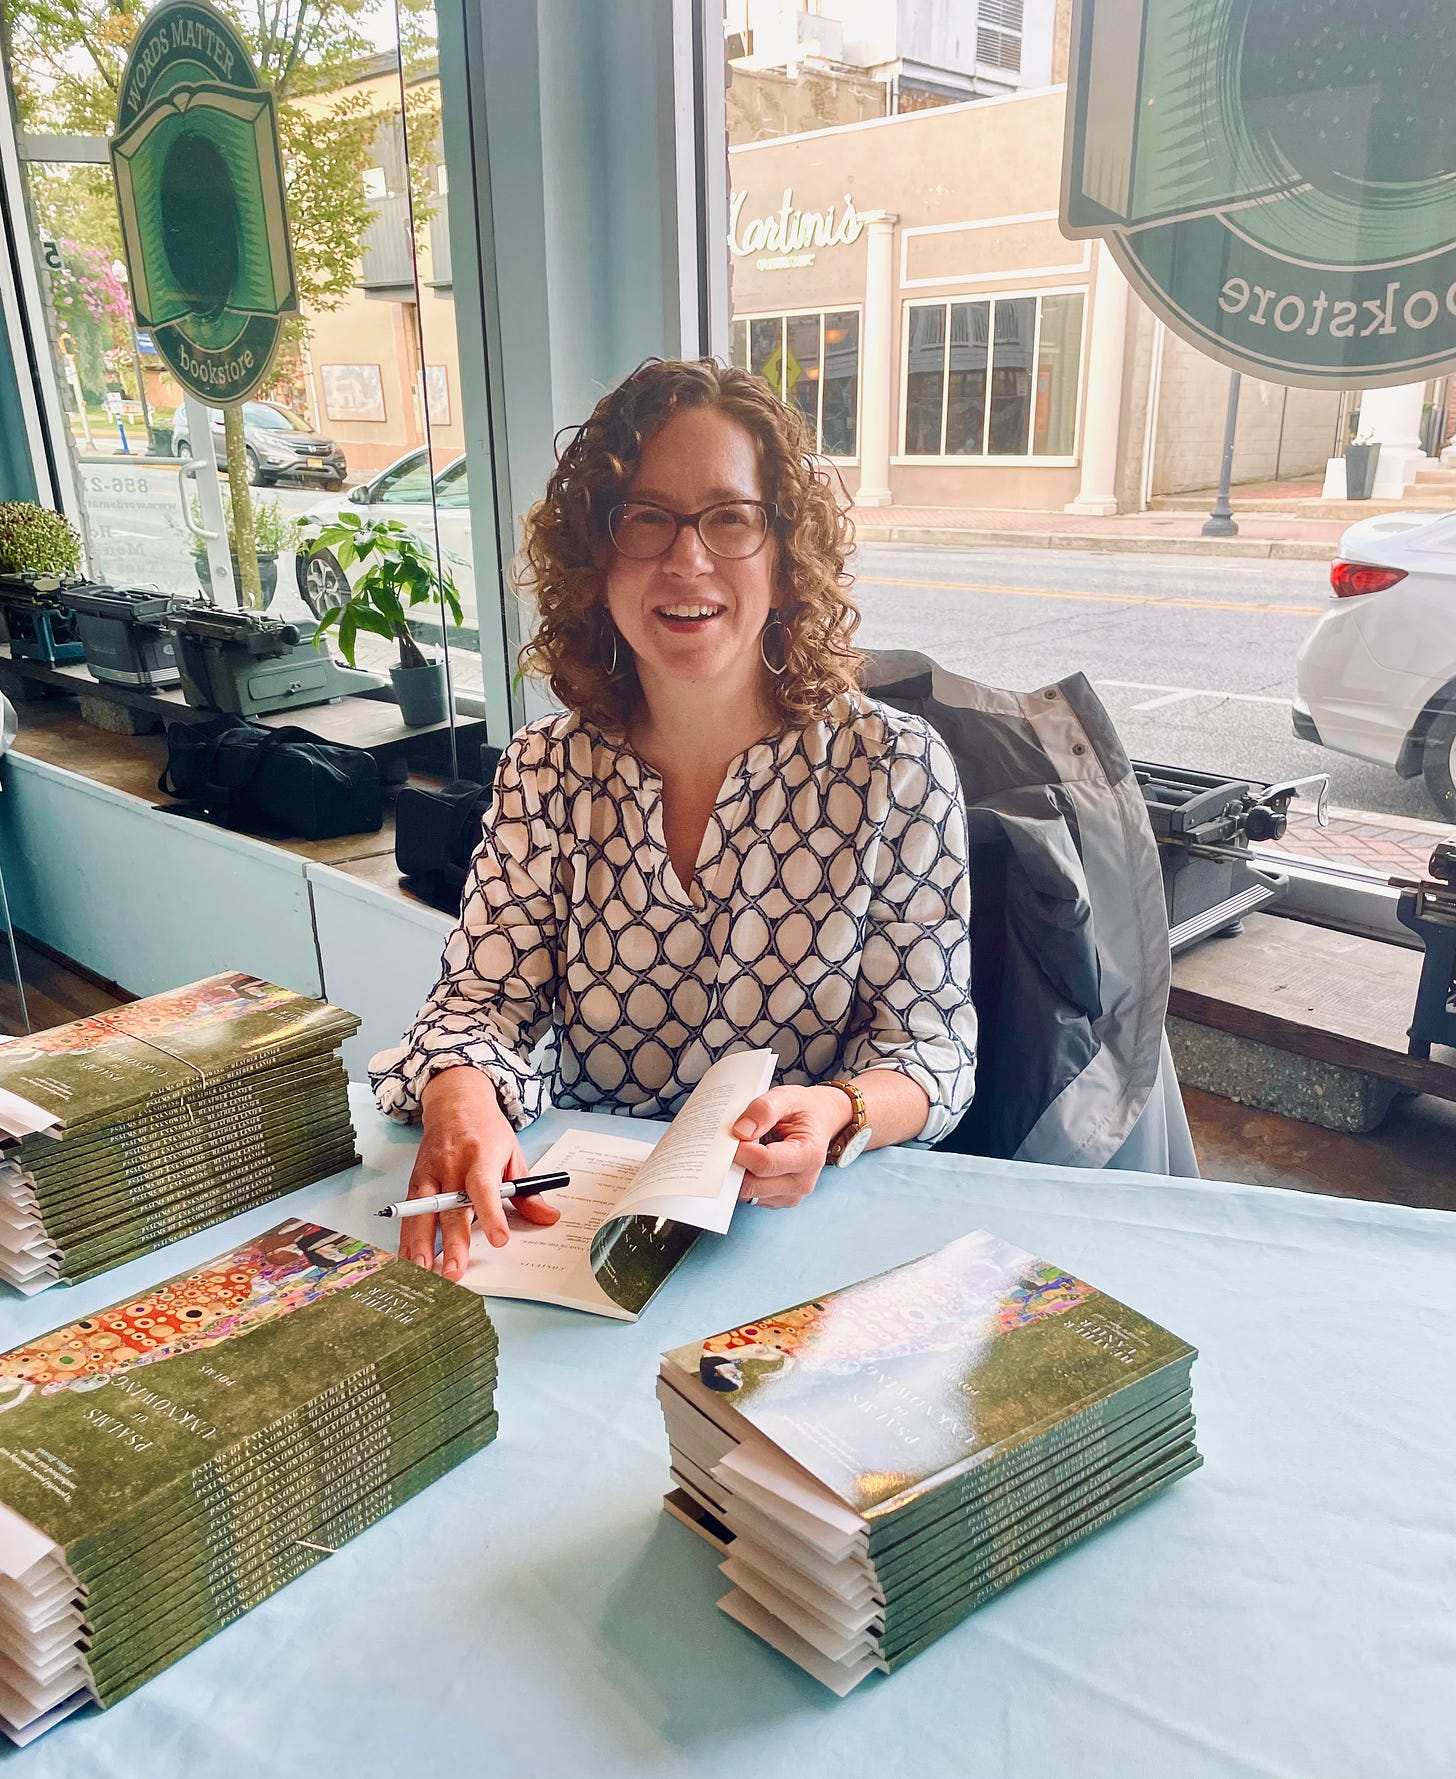 Author HEATHER LANIER signing books at a table. Behind her, a store front window facing a street.